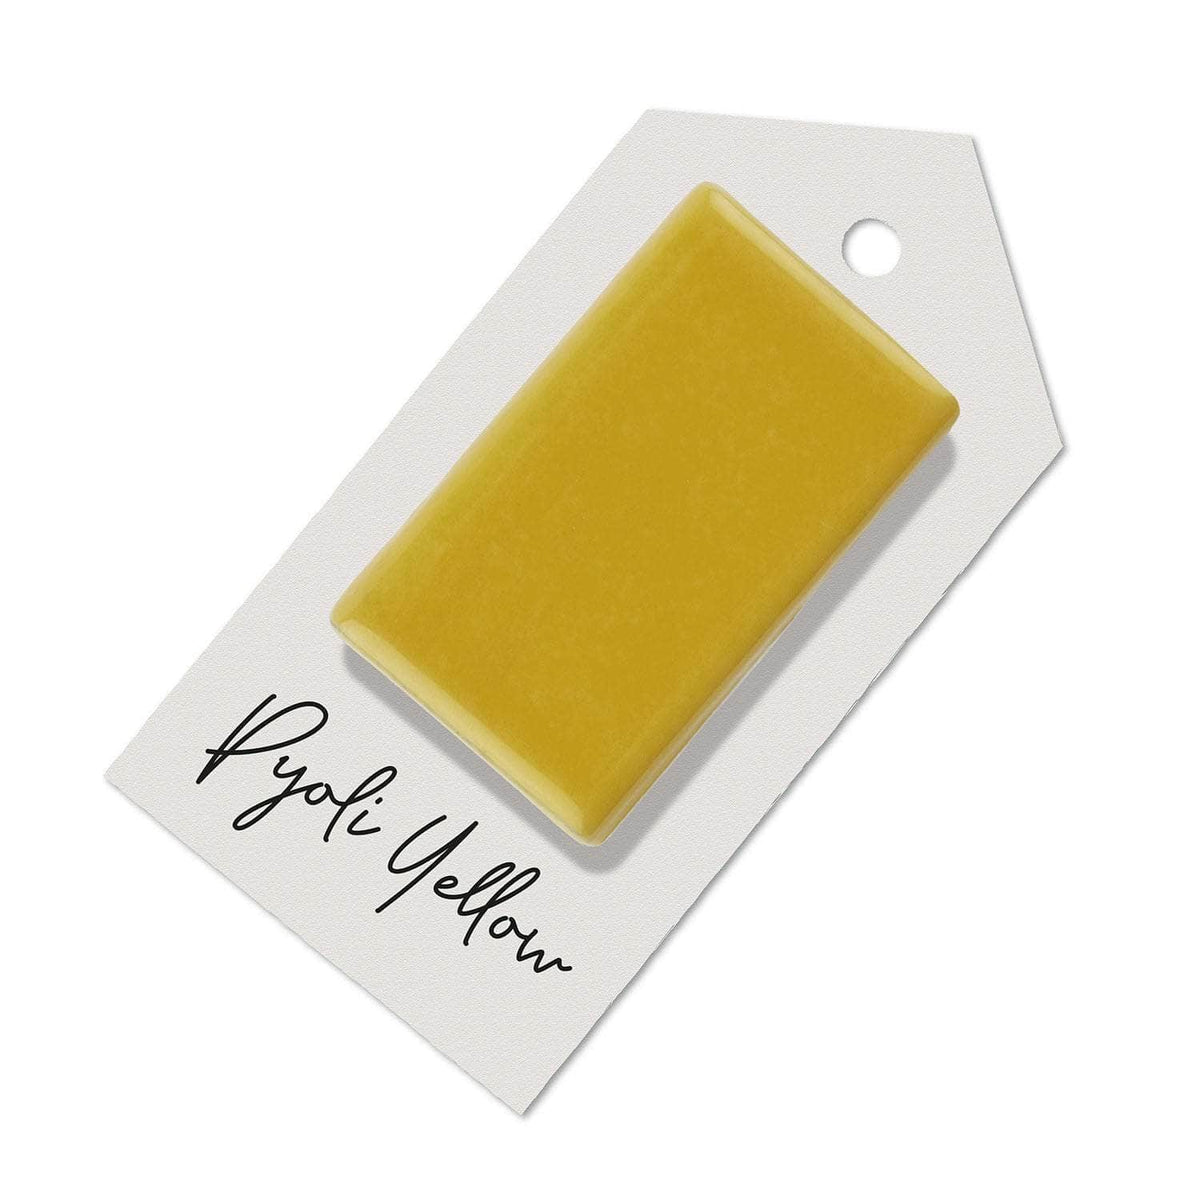 Pyoli Yellow sample for Aga range cooker re-enamelling &amp; reconditioned cookers